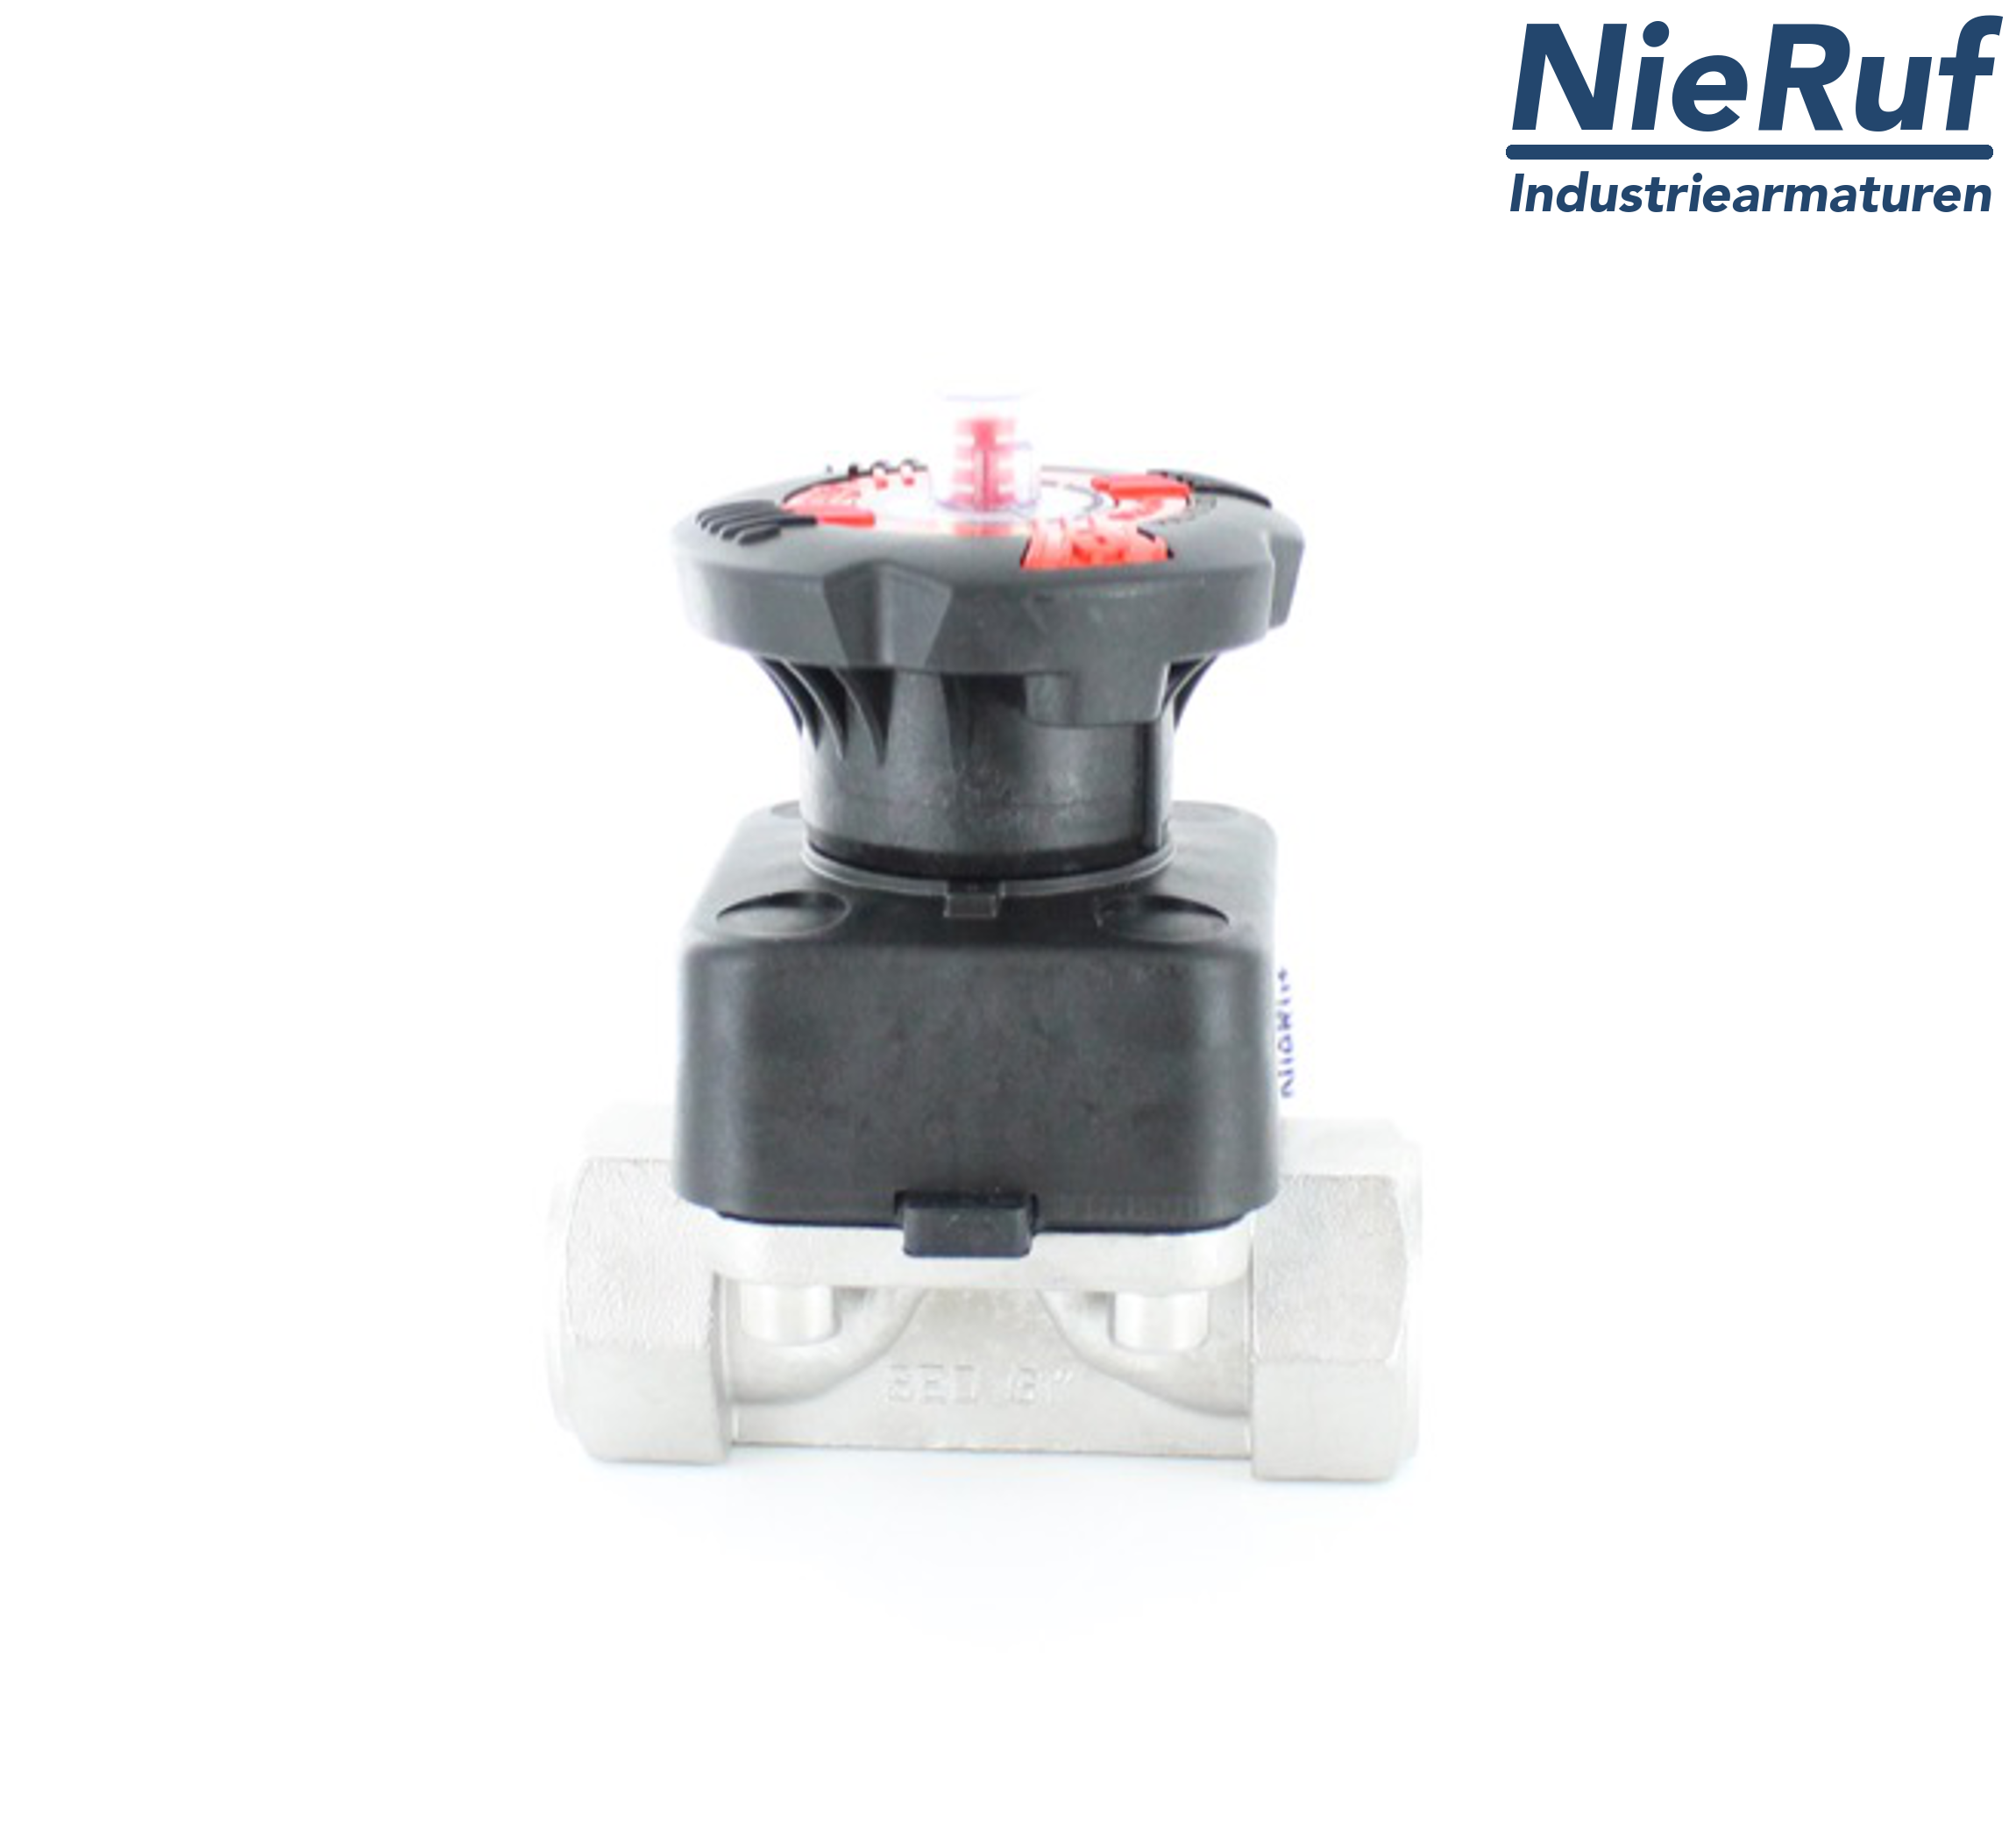 stainless steel-diaphragm valve 3/4 Inch membrane PTFE/EPDM two-piece female thread BSP